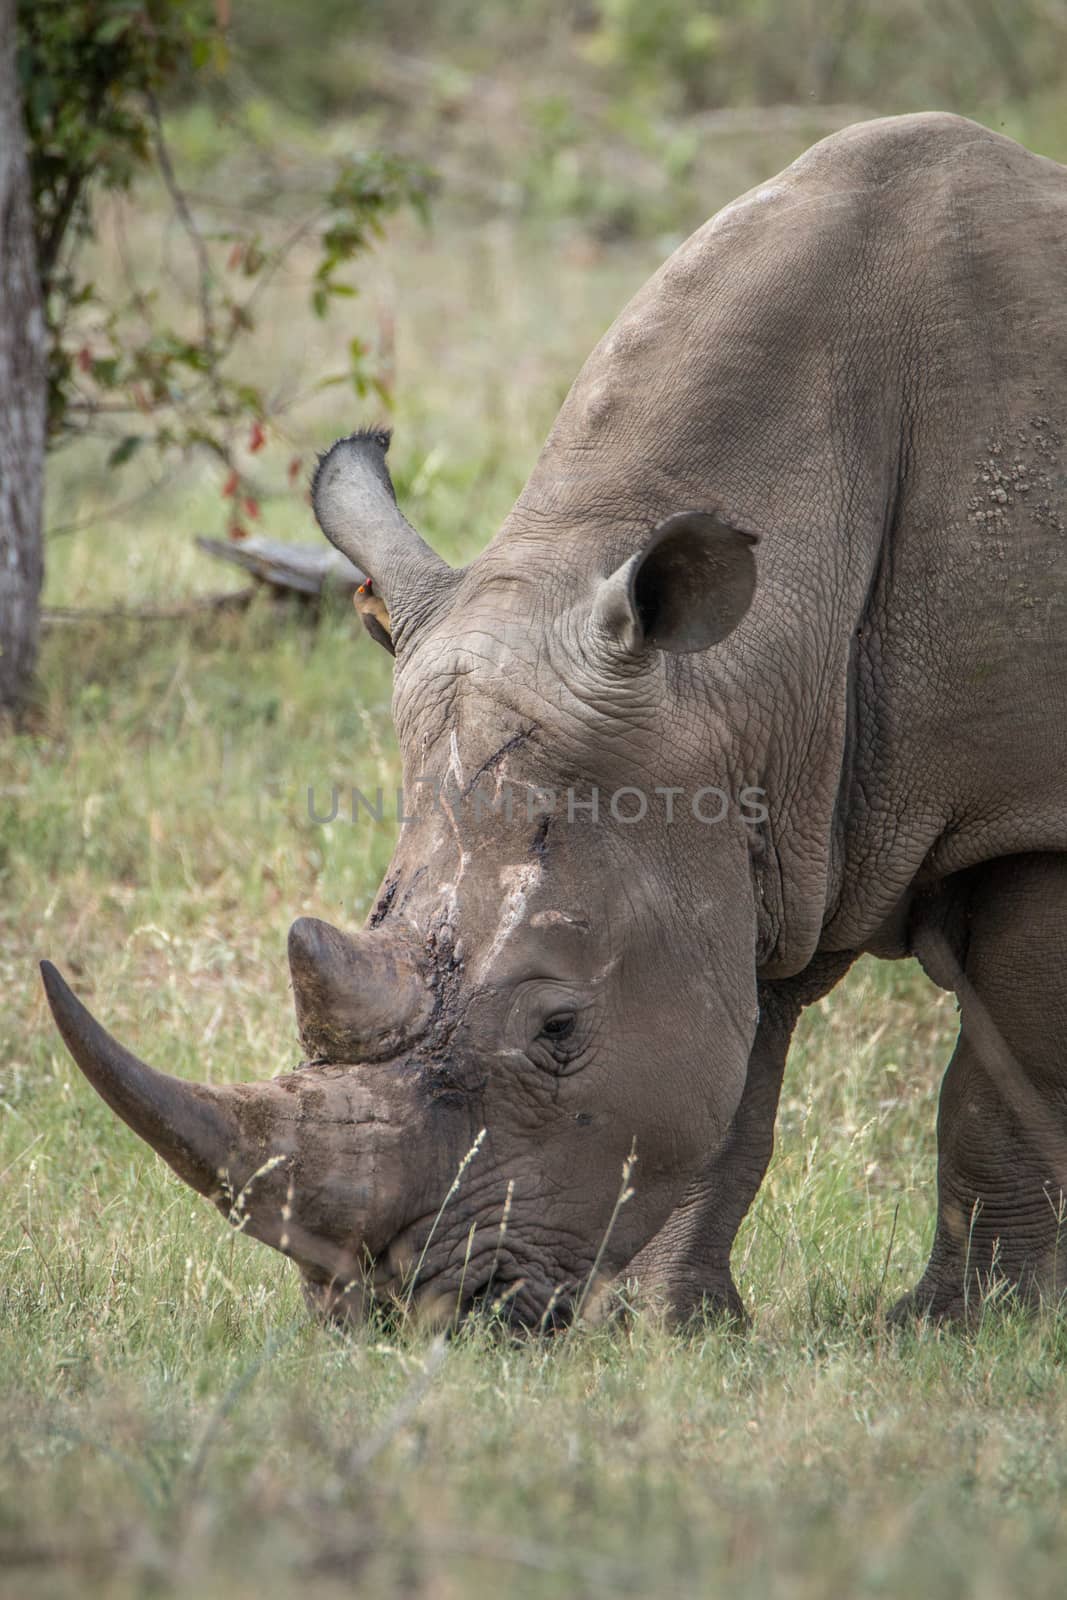 Grazing White rhino in the Kruger National Park by Simoneemanphotography